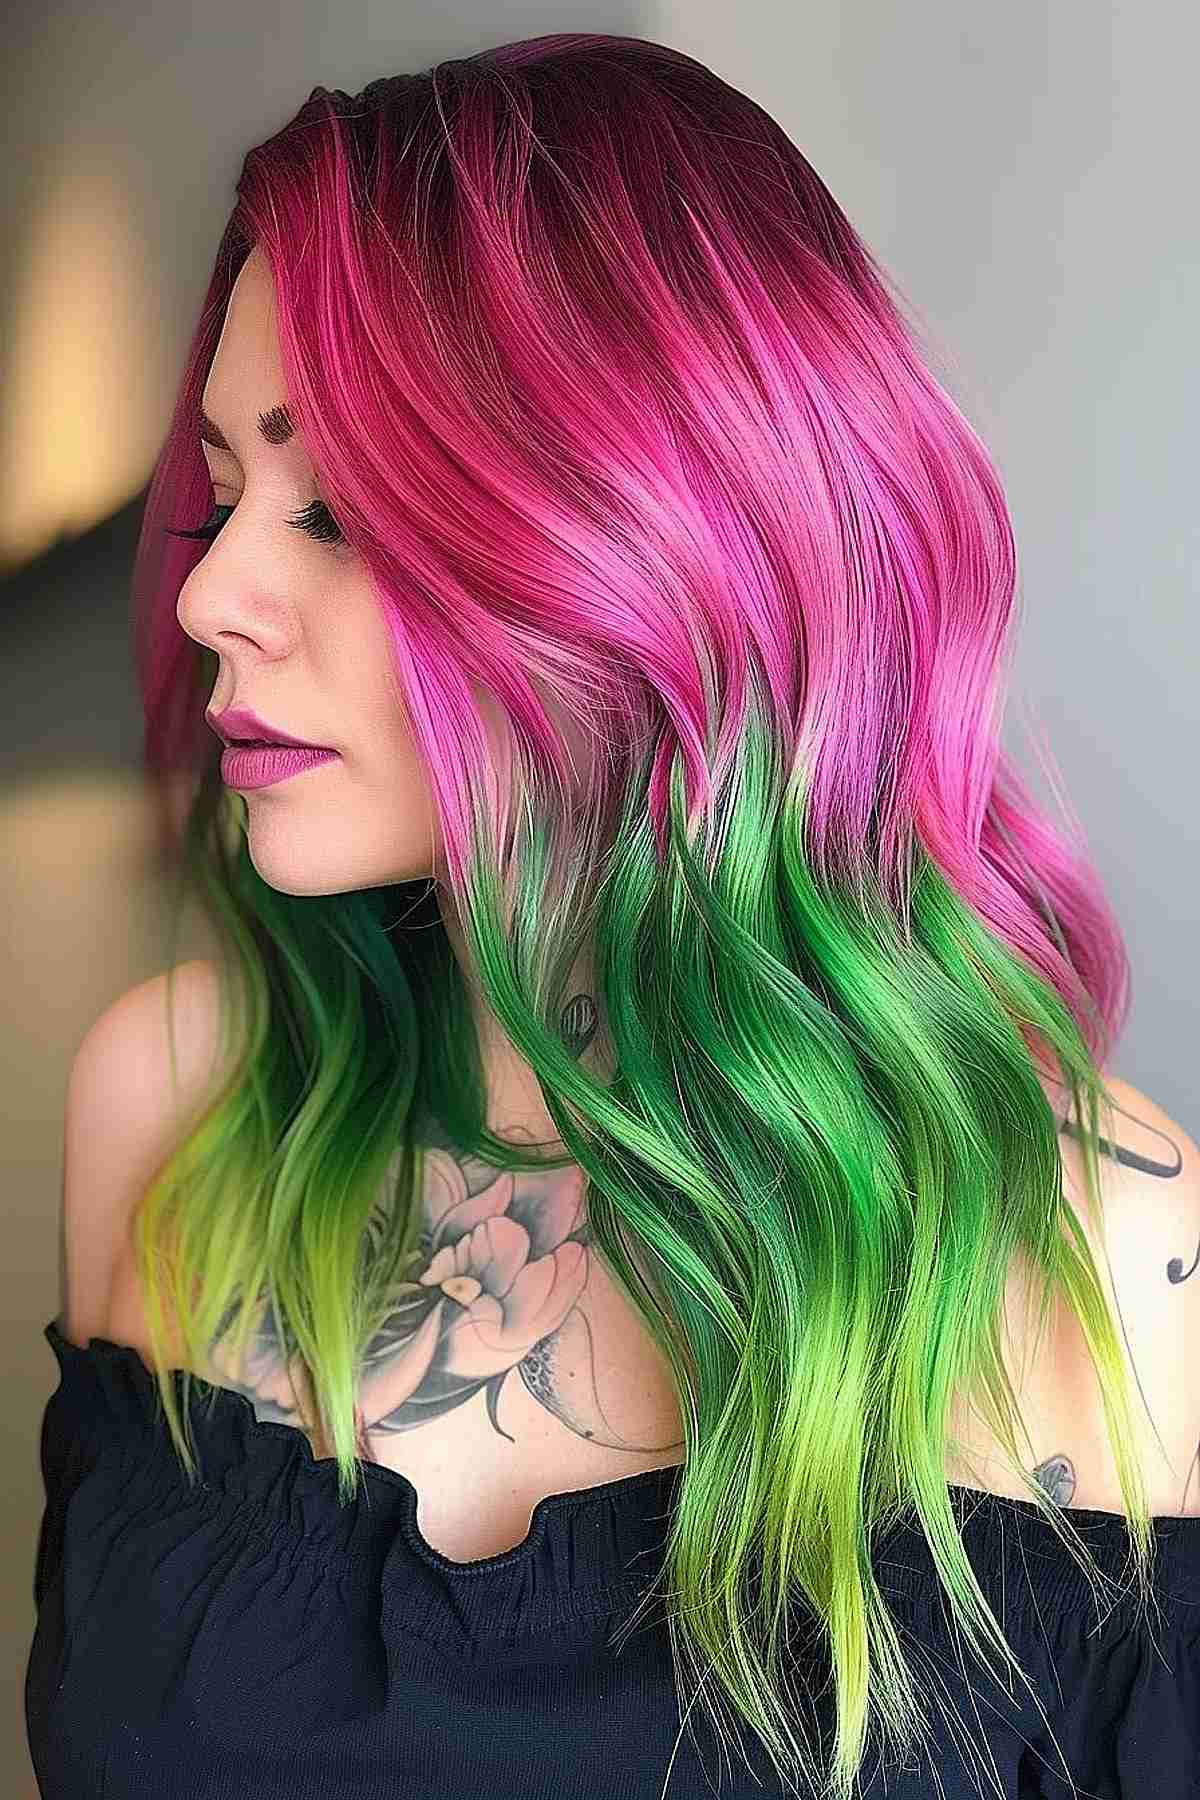 A woman with long wavy hair featuring a vibrant transition from deep magenta to bright lime green, embodying a bold and dramatic watermelon-inspired color scheme.